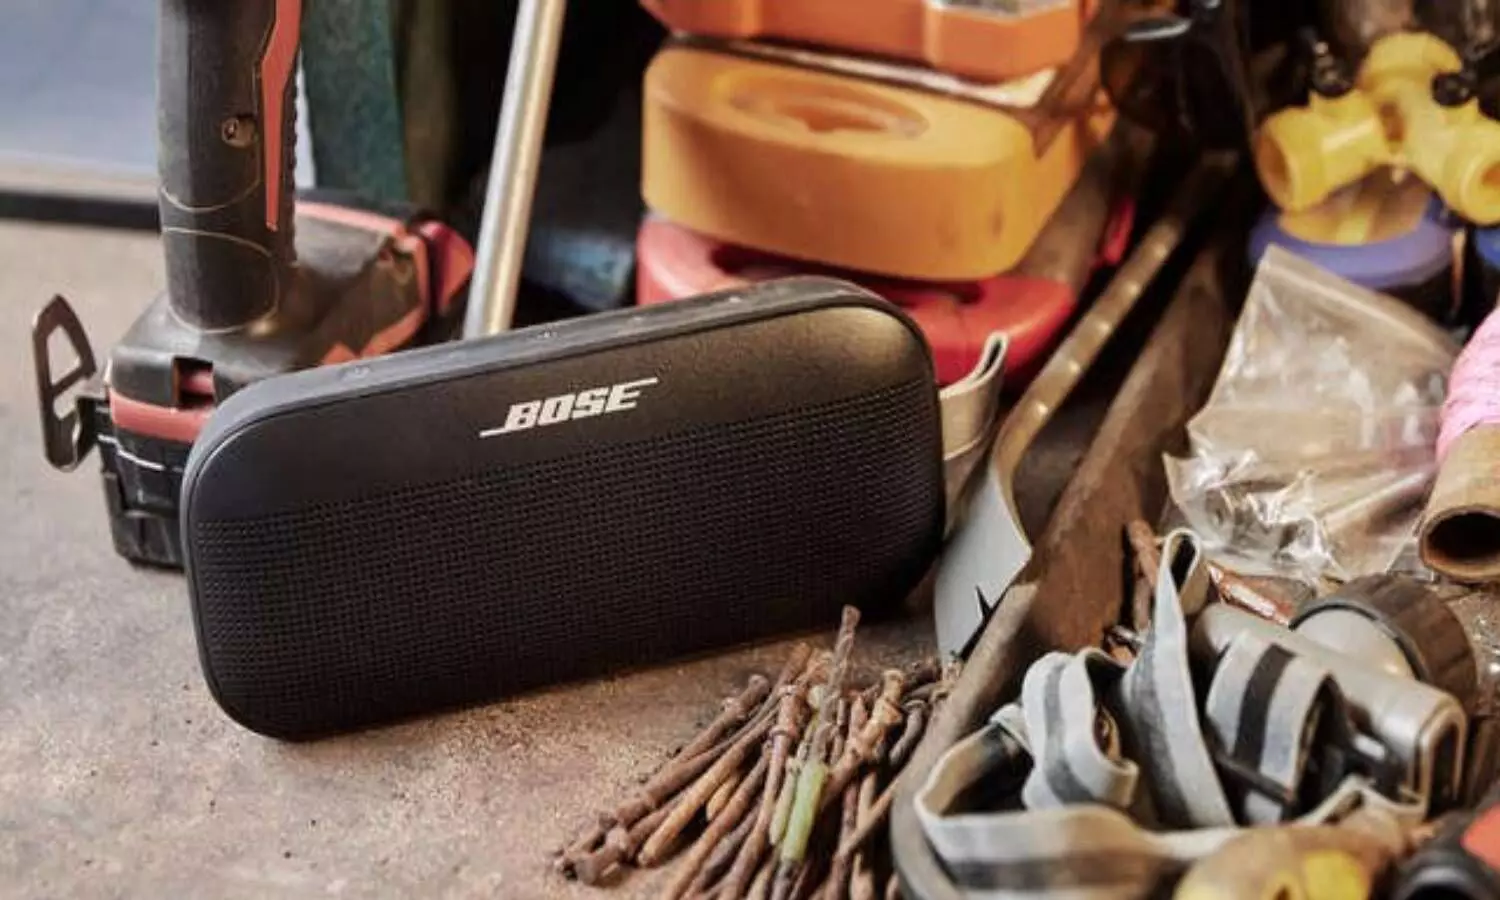 Boses new ultra-rugged speaker for outdoor adventure